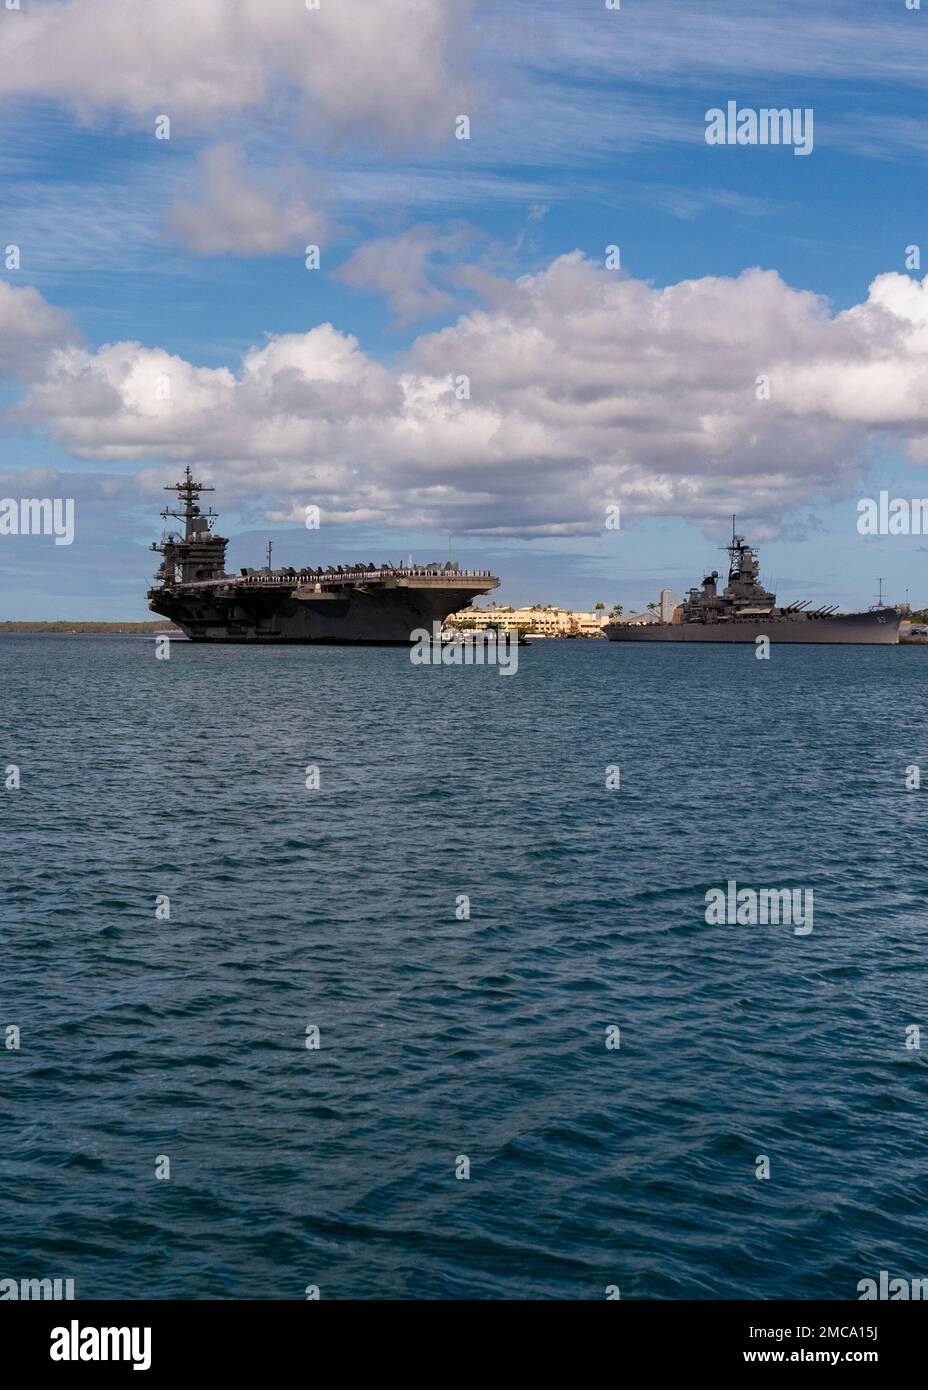 220628-N-PV401-1017 PEARL HARBOR (June 28, 2022) – Nimitz-class aircraft carrier USS Abraham Lincoln (CVN 72), arrives at Joint Base Pearl Harbor-Hickam to participate in the Rim of the Pacific (RIMPAC) 2022. Twenty-six nations, 38 ships, four submarines, more than 170 aircraft and 25,000 personnel are participating in RIMPAC from June 29 to Aug. 4 in and around the Hawaiian Islands and Southern California. The world’s largest international maritime exercise, RIMPAC provides a unique training opportunity while fostering and sustaining cooperative relationships among participants critical to en Stock Photo